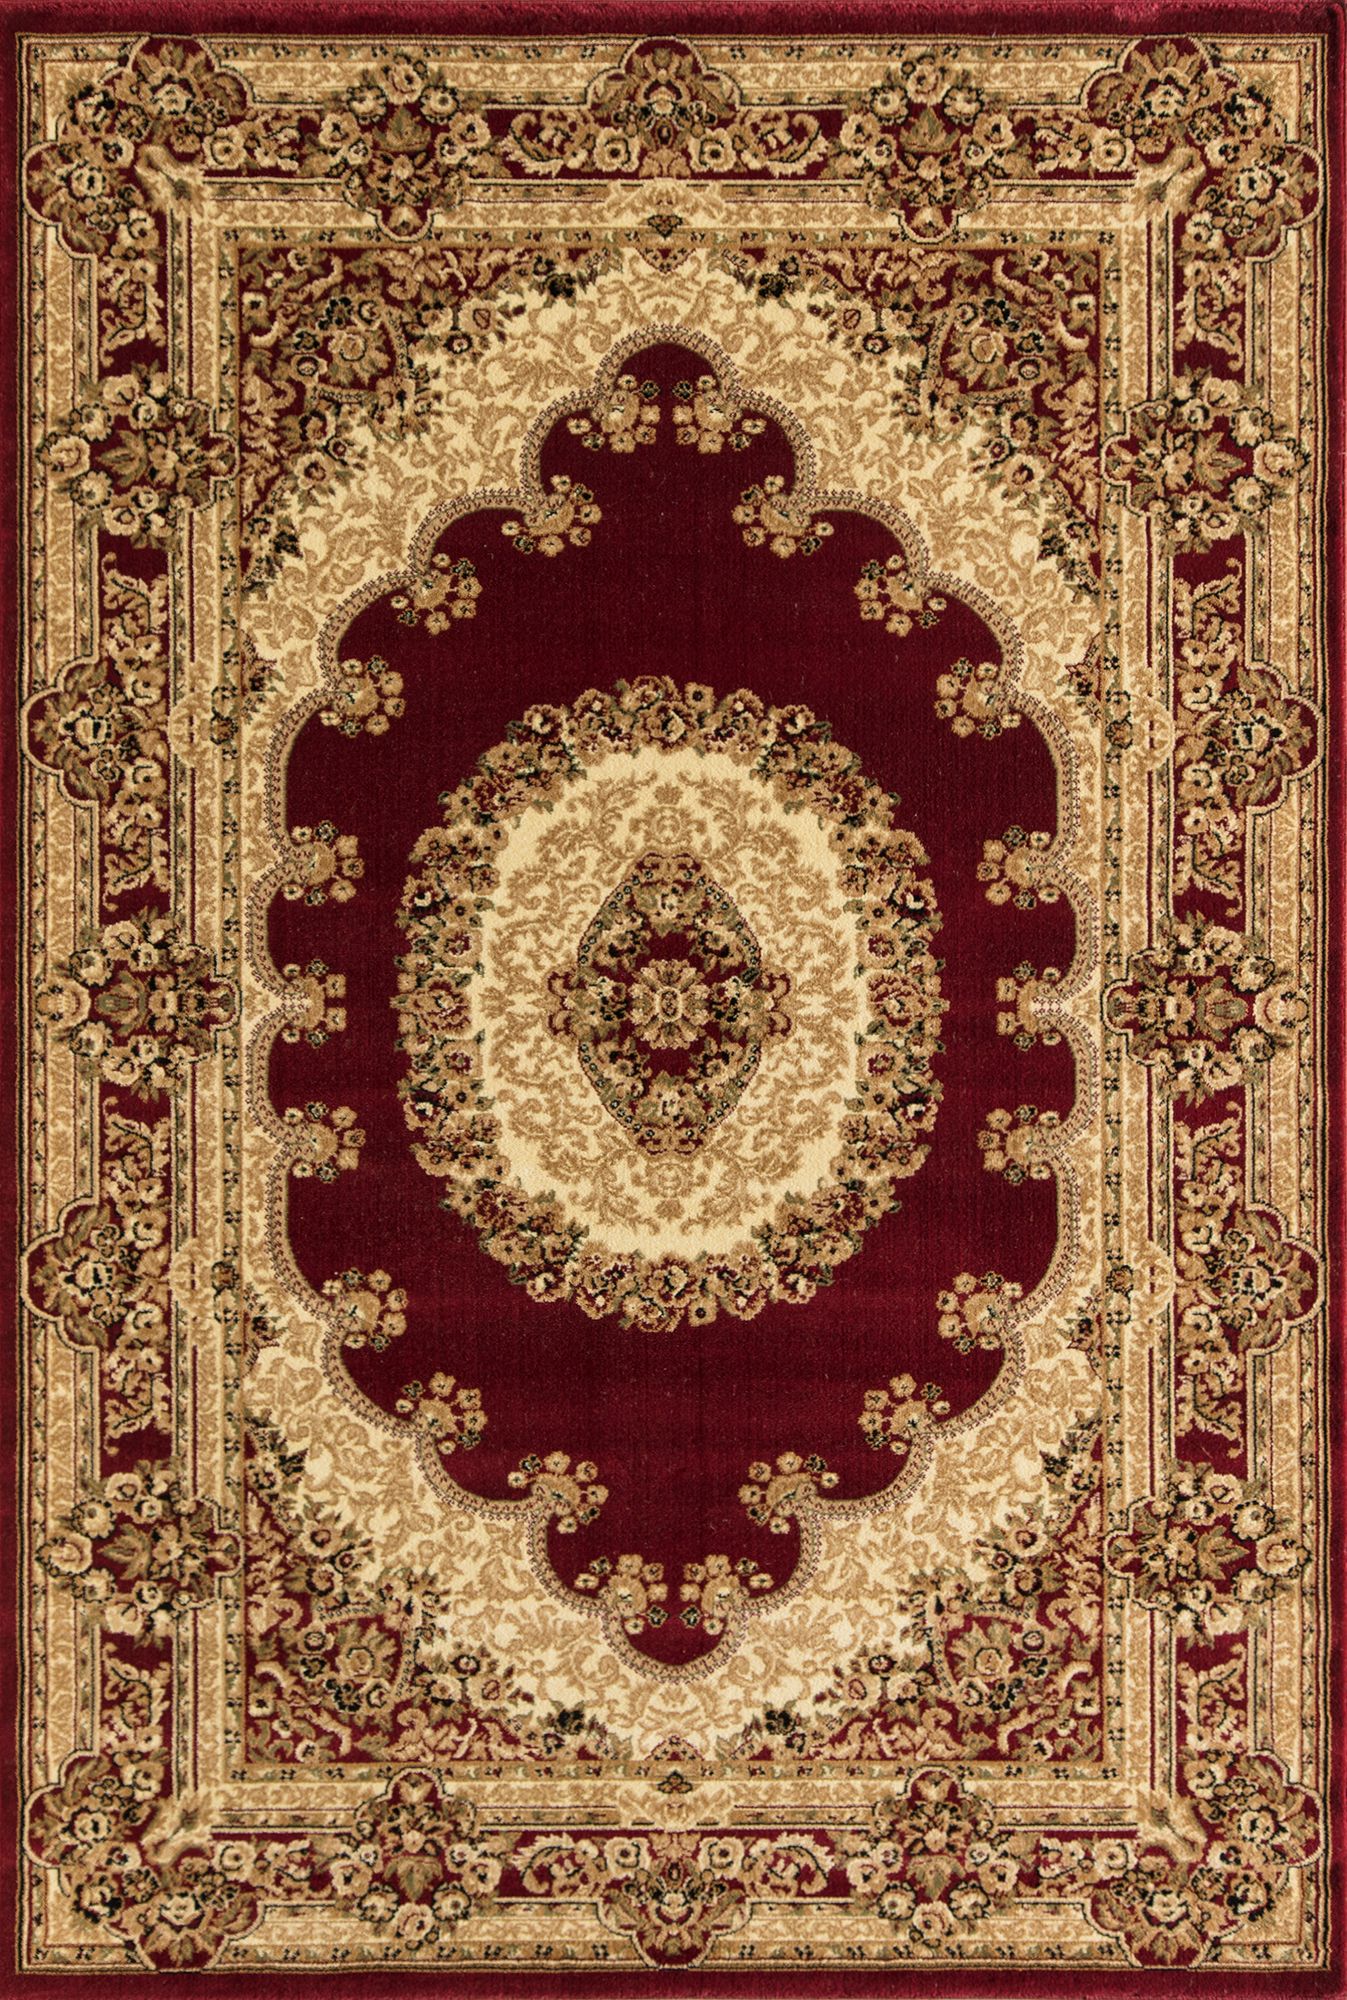 Rugs America Vista 807-RED Kerman Red Oriental Traditional Red Area Rug, 2'x2'11" - image 2 of 3